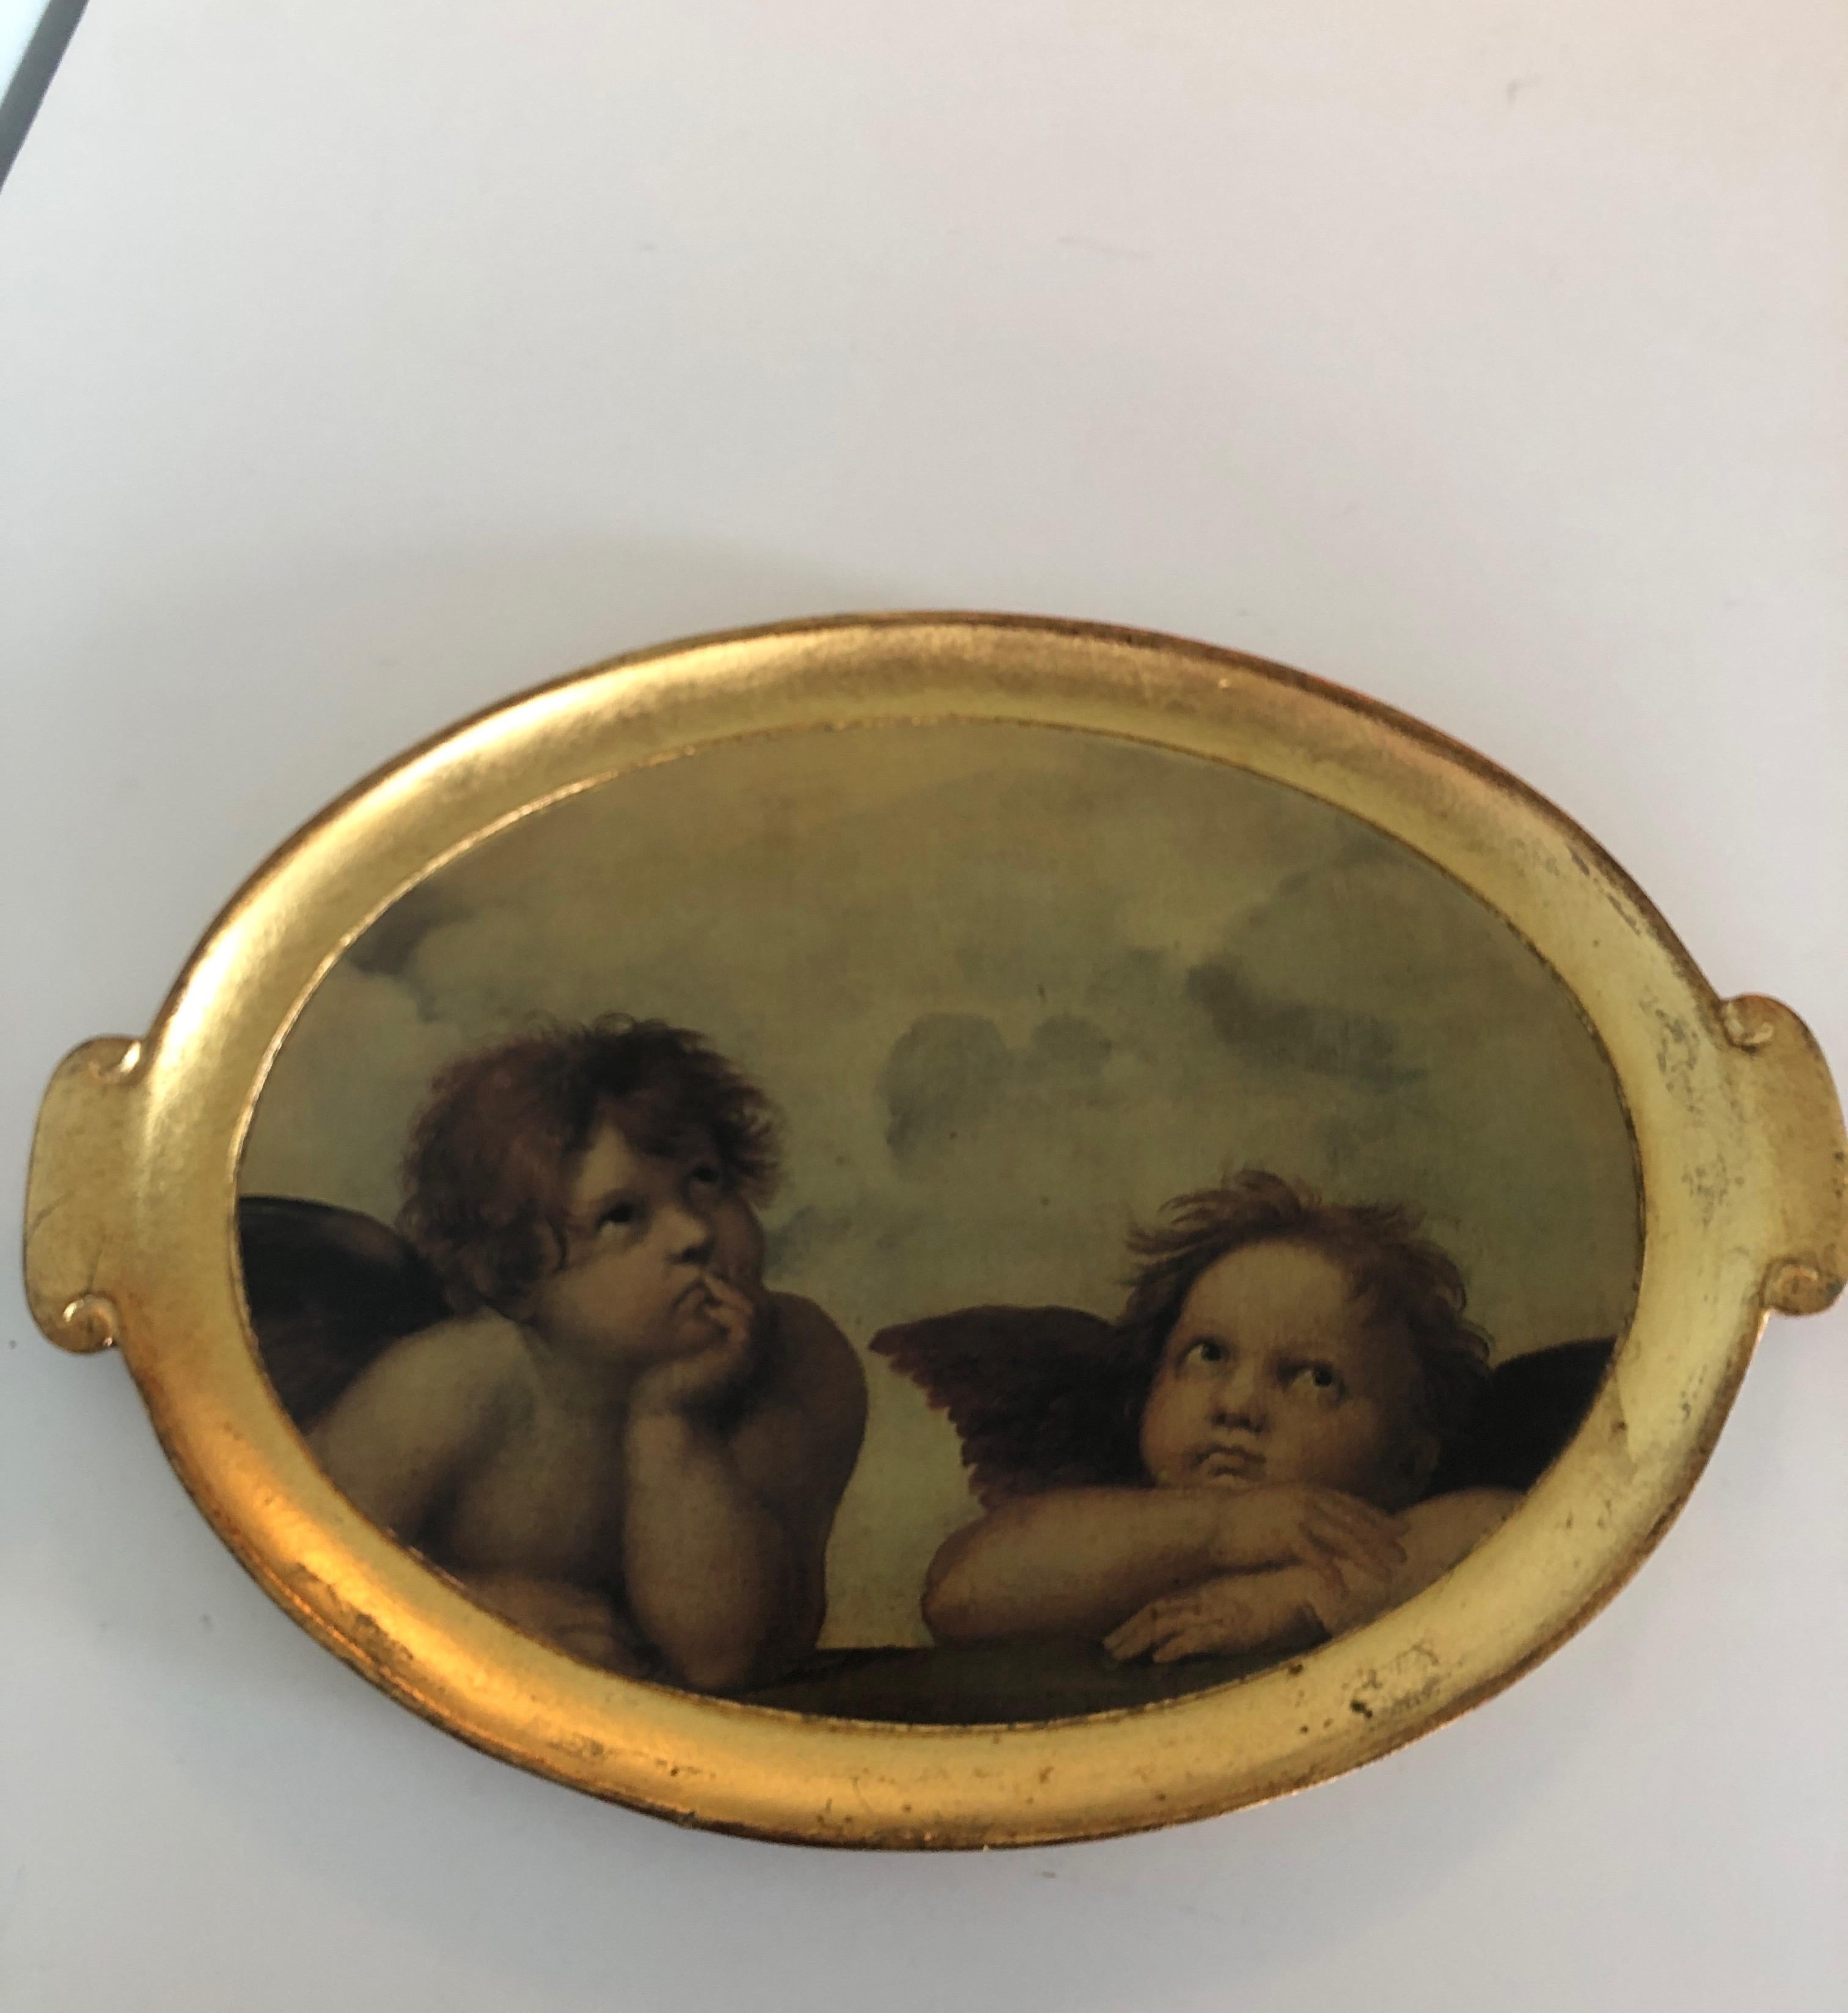 Vintage large oval gold leaf serving tray.
Wood tray depicting cherubs.
Stamped hand-painted, made in Italy.
Size: 17.25